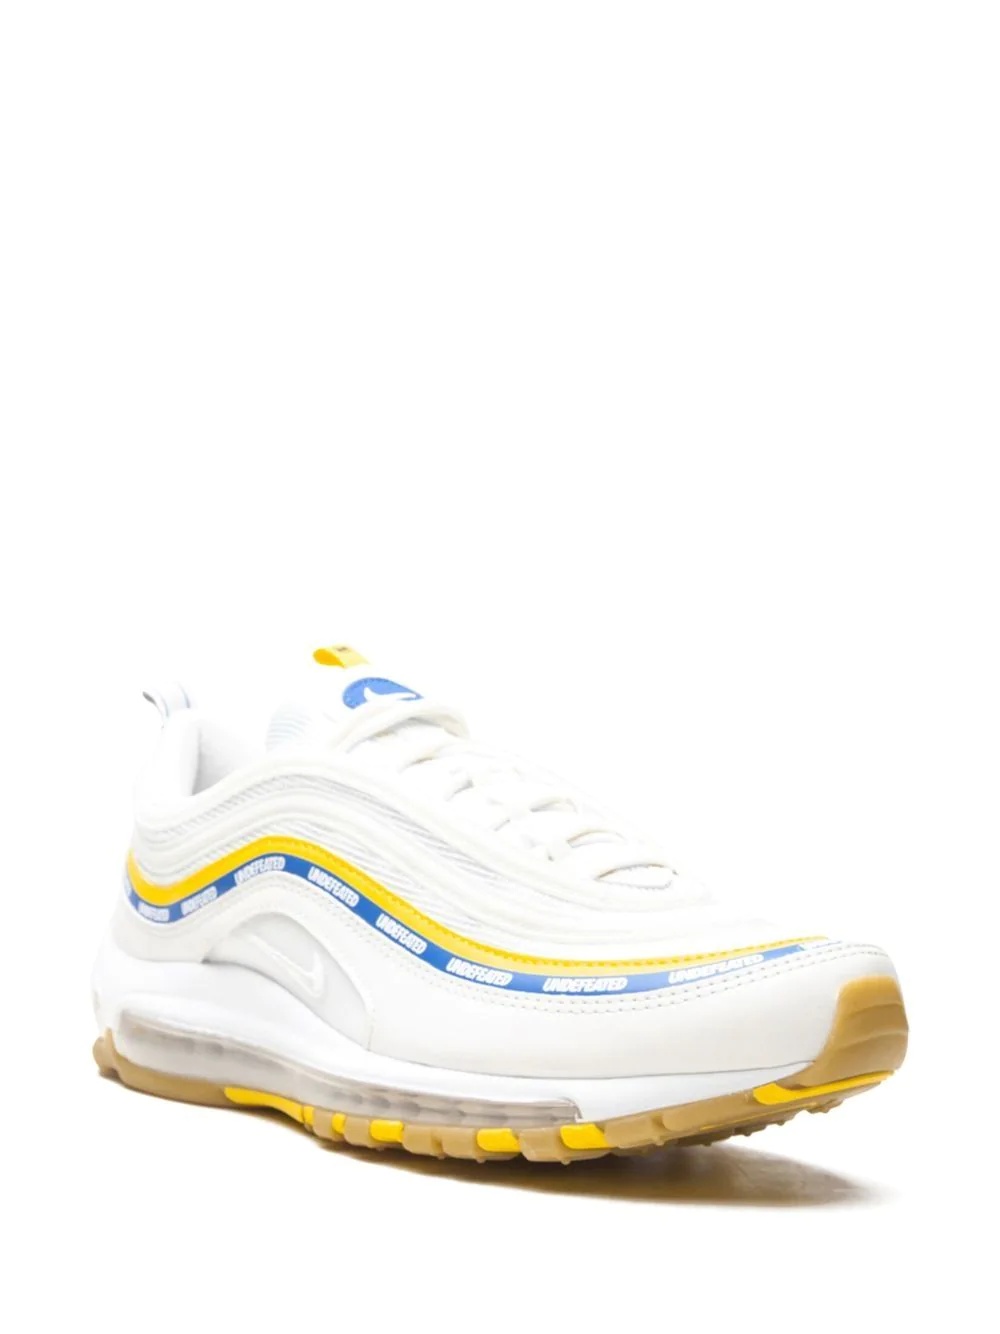 x Undefeated Air Max 97 sneakers - 2